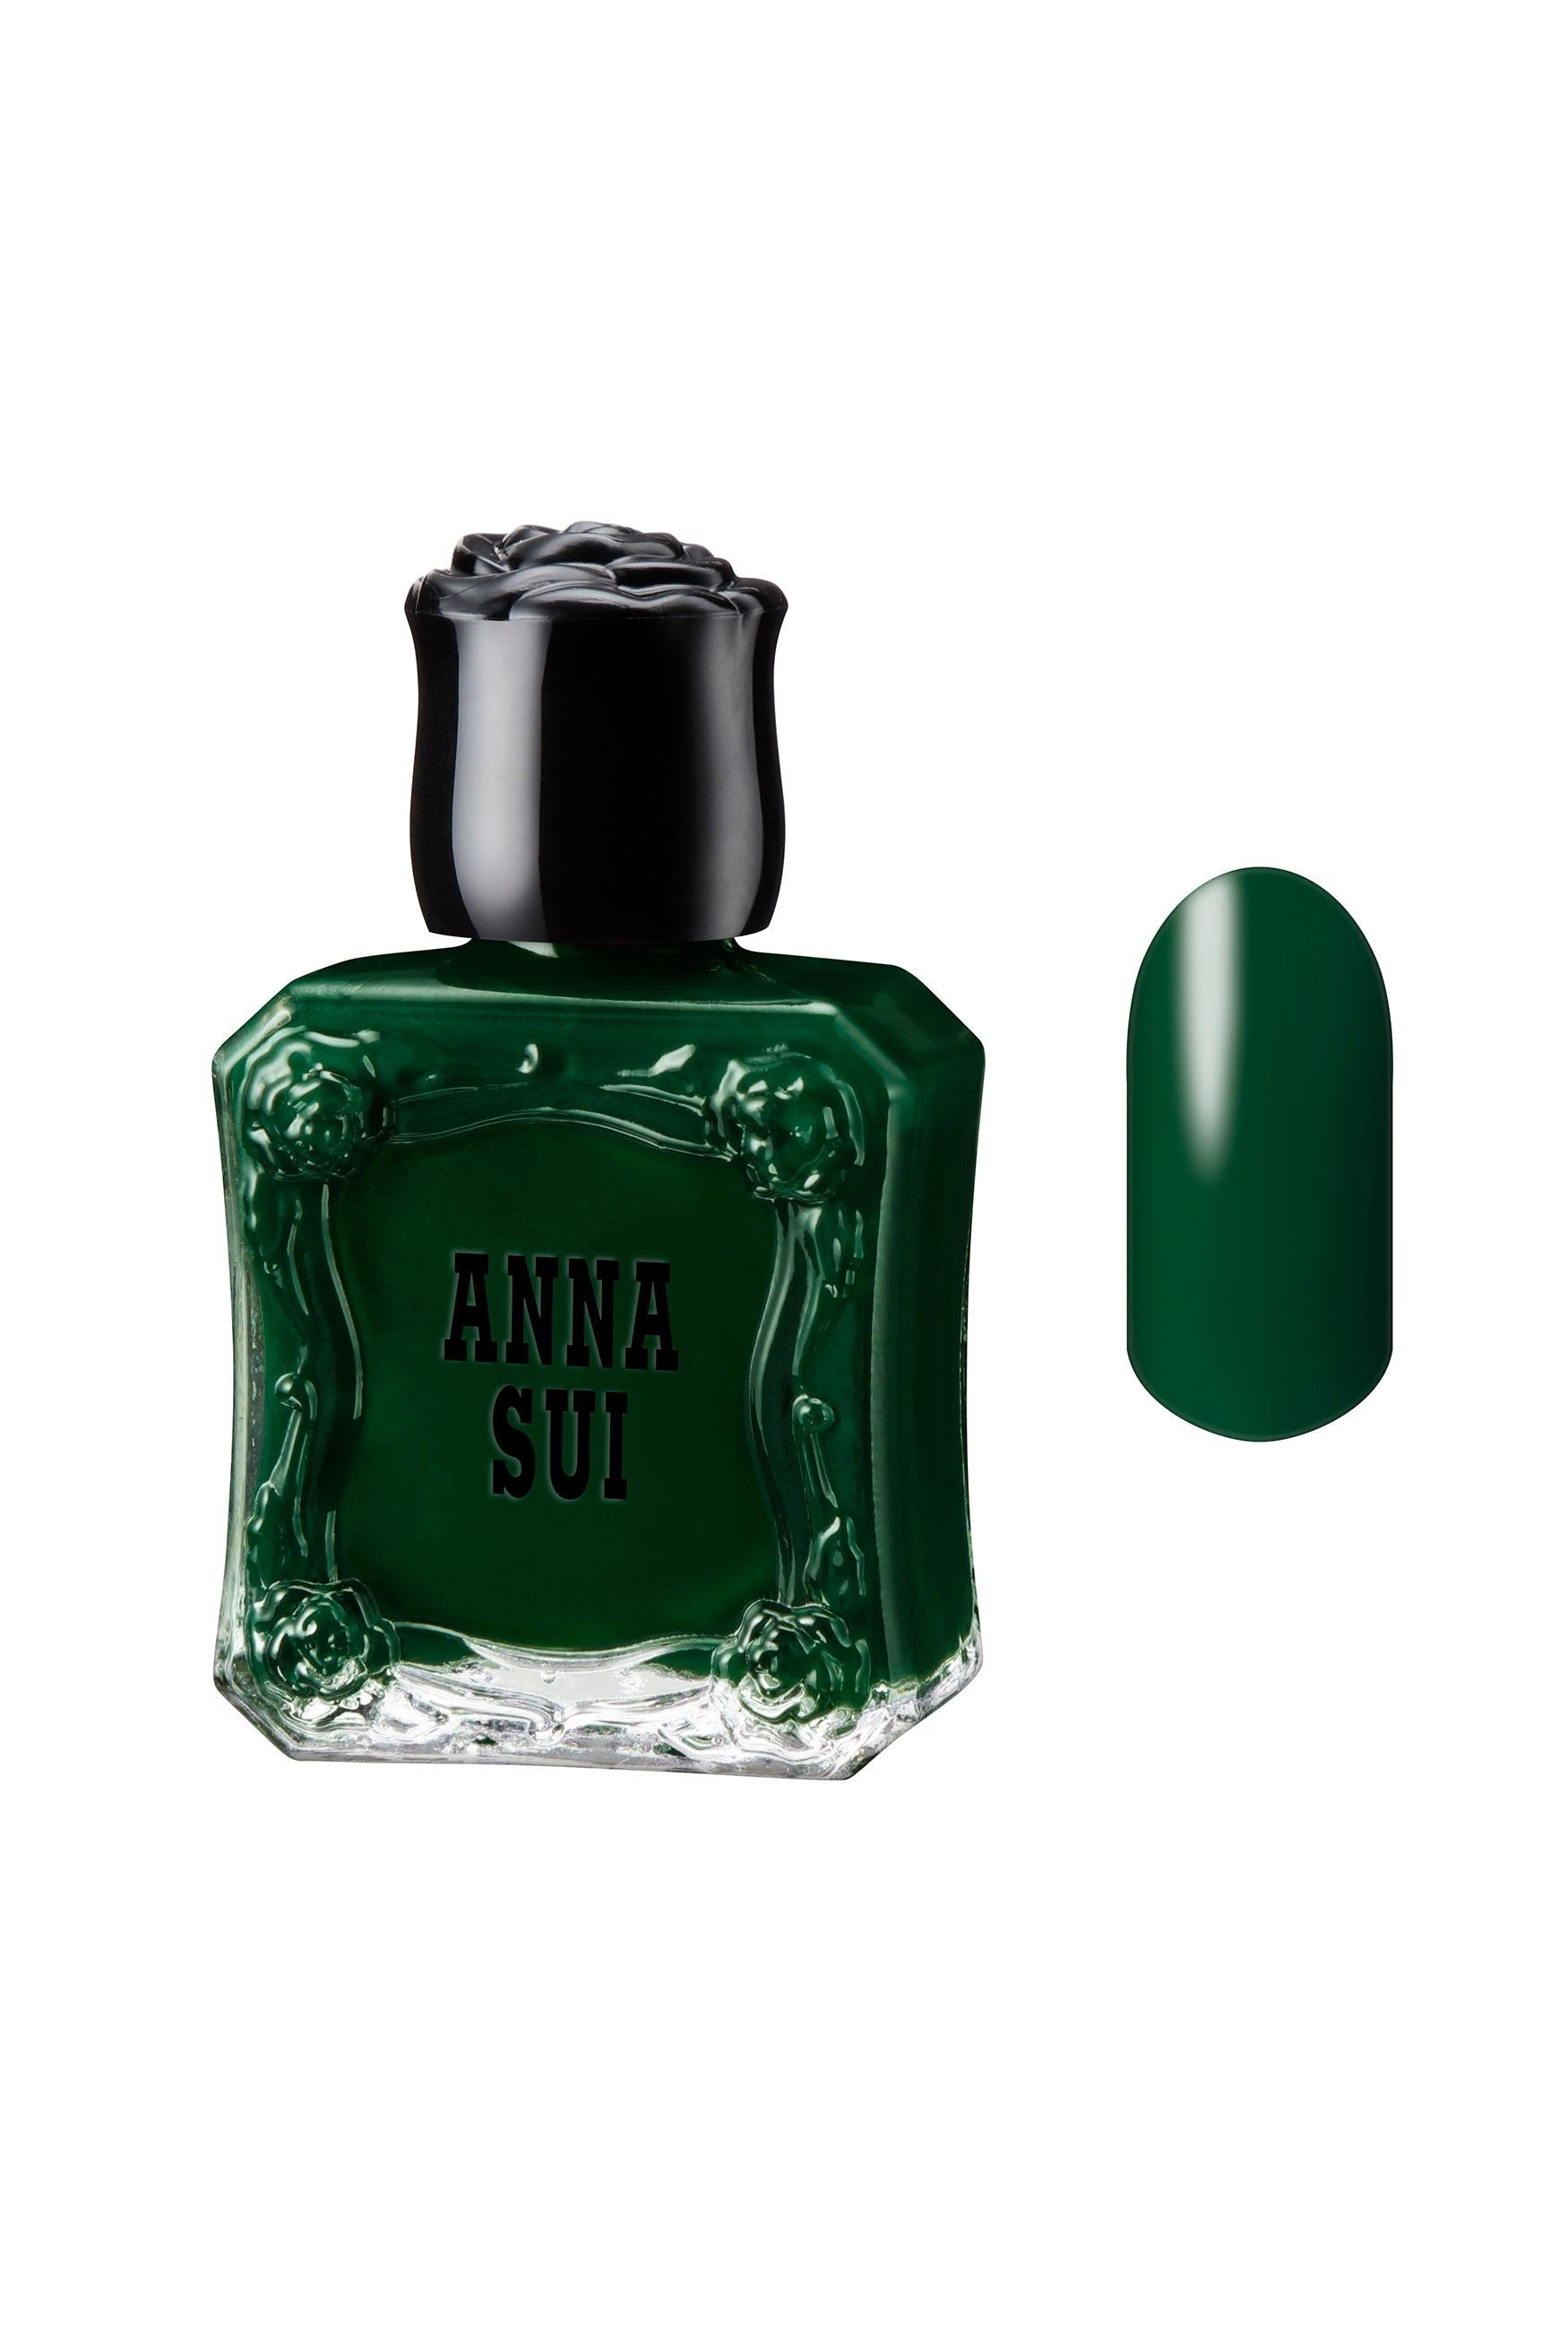 EMERALD GREEN: black cap rose shape, with Anna Sui floral design and label